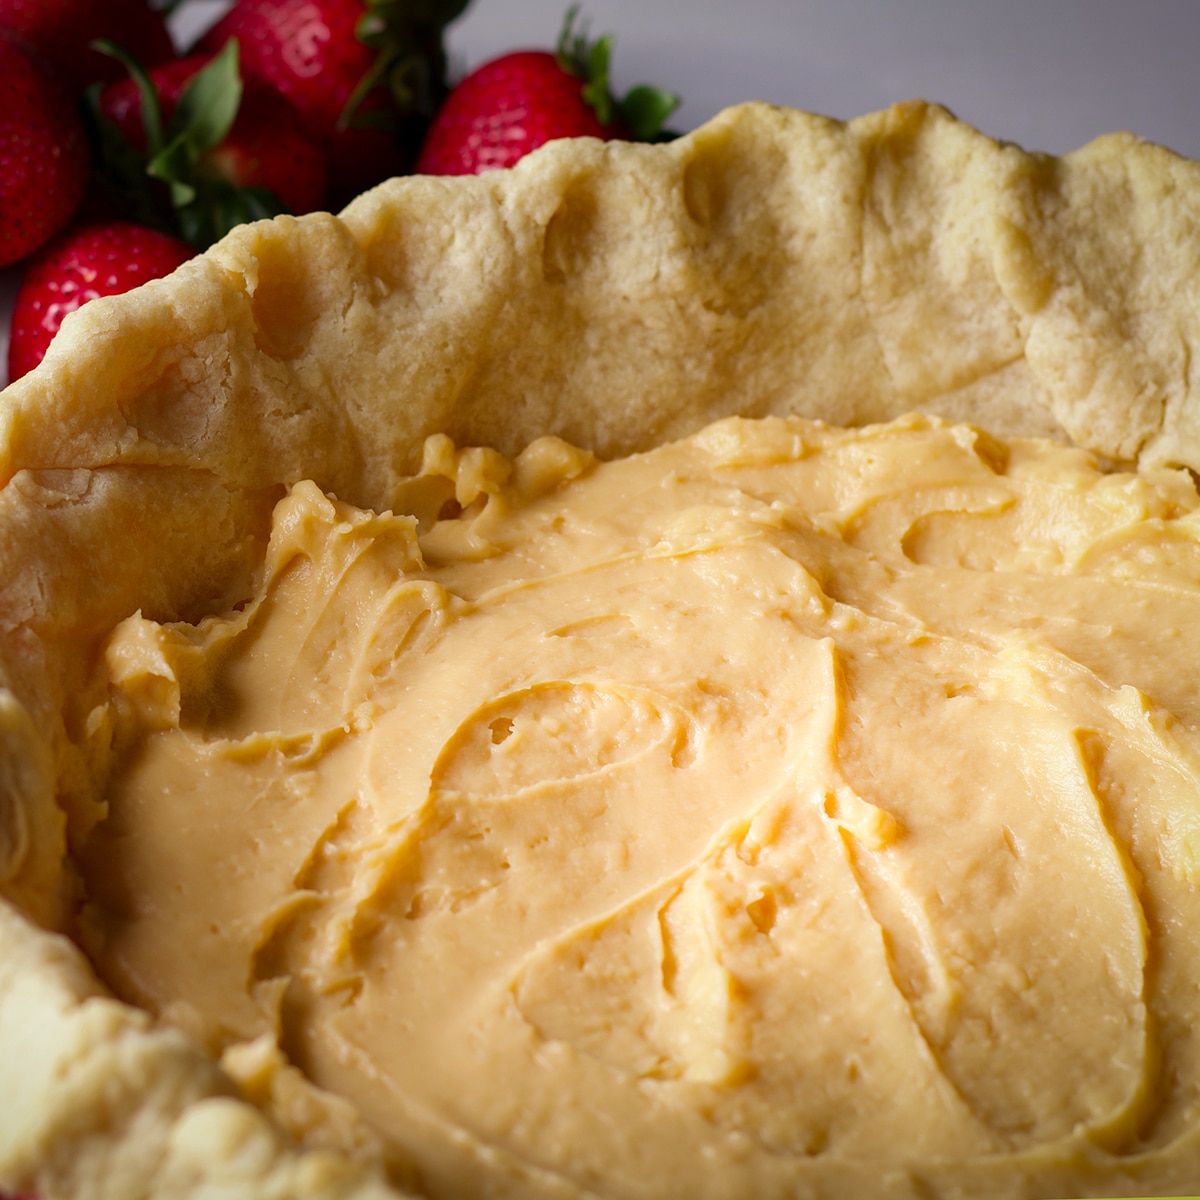 A partially baked pie crust that's been filled with a layer of pastry cream.